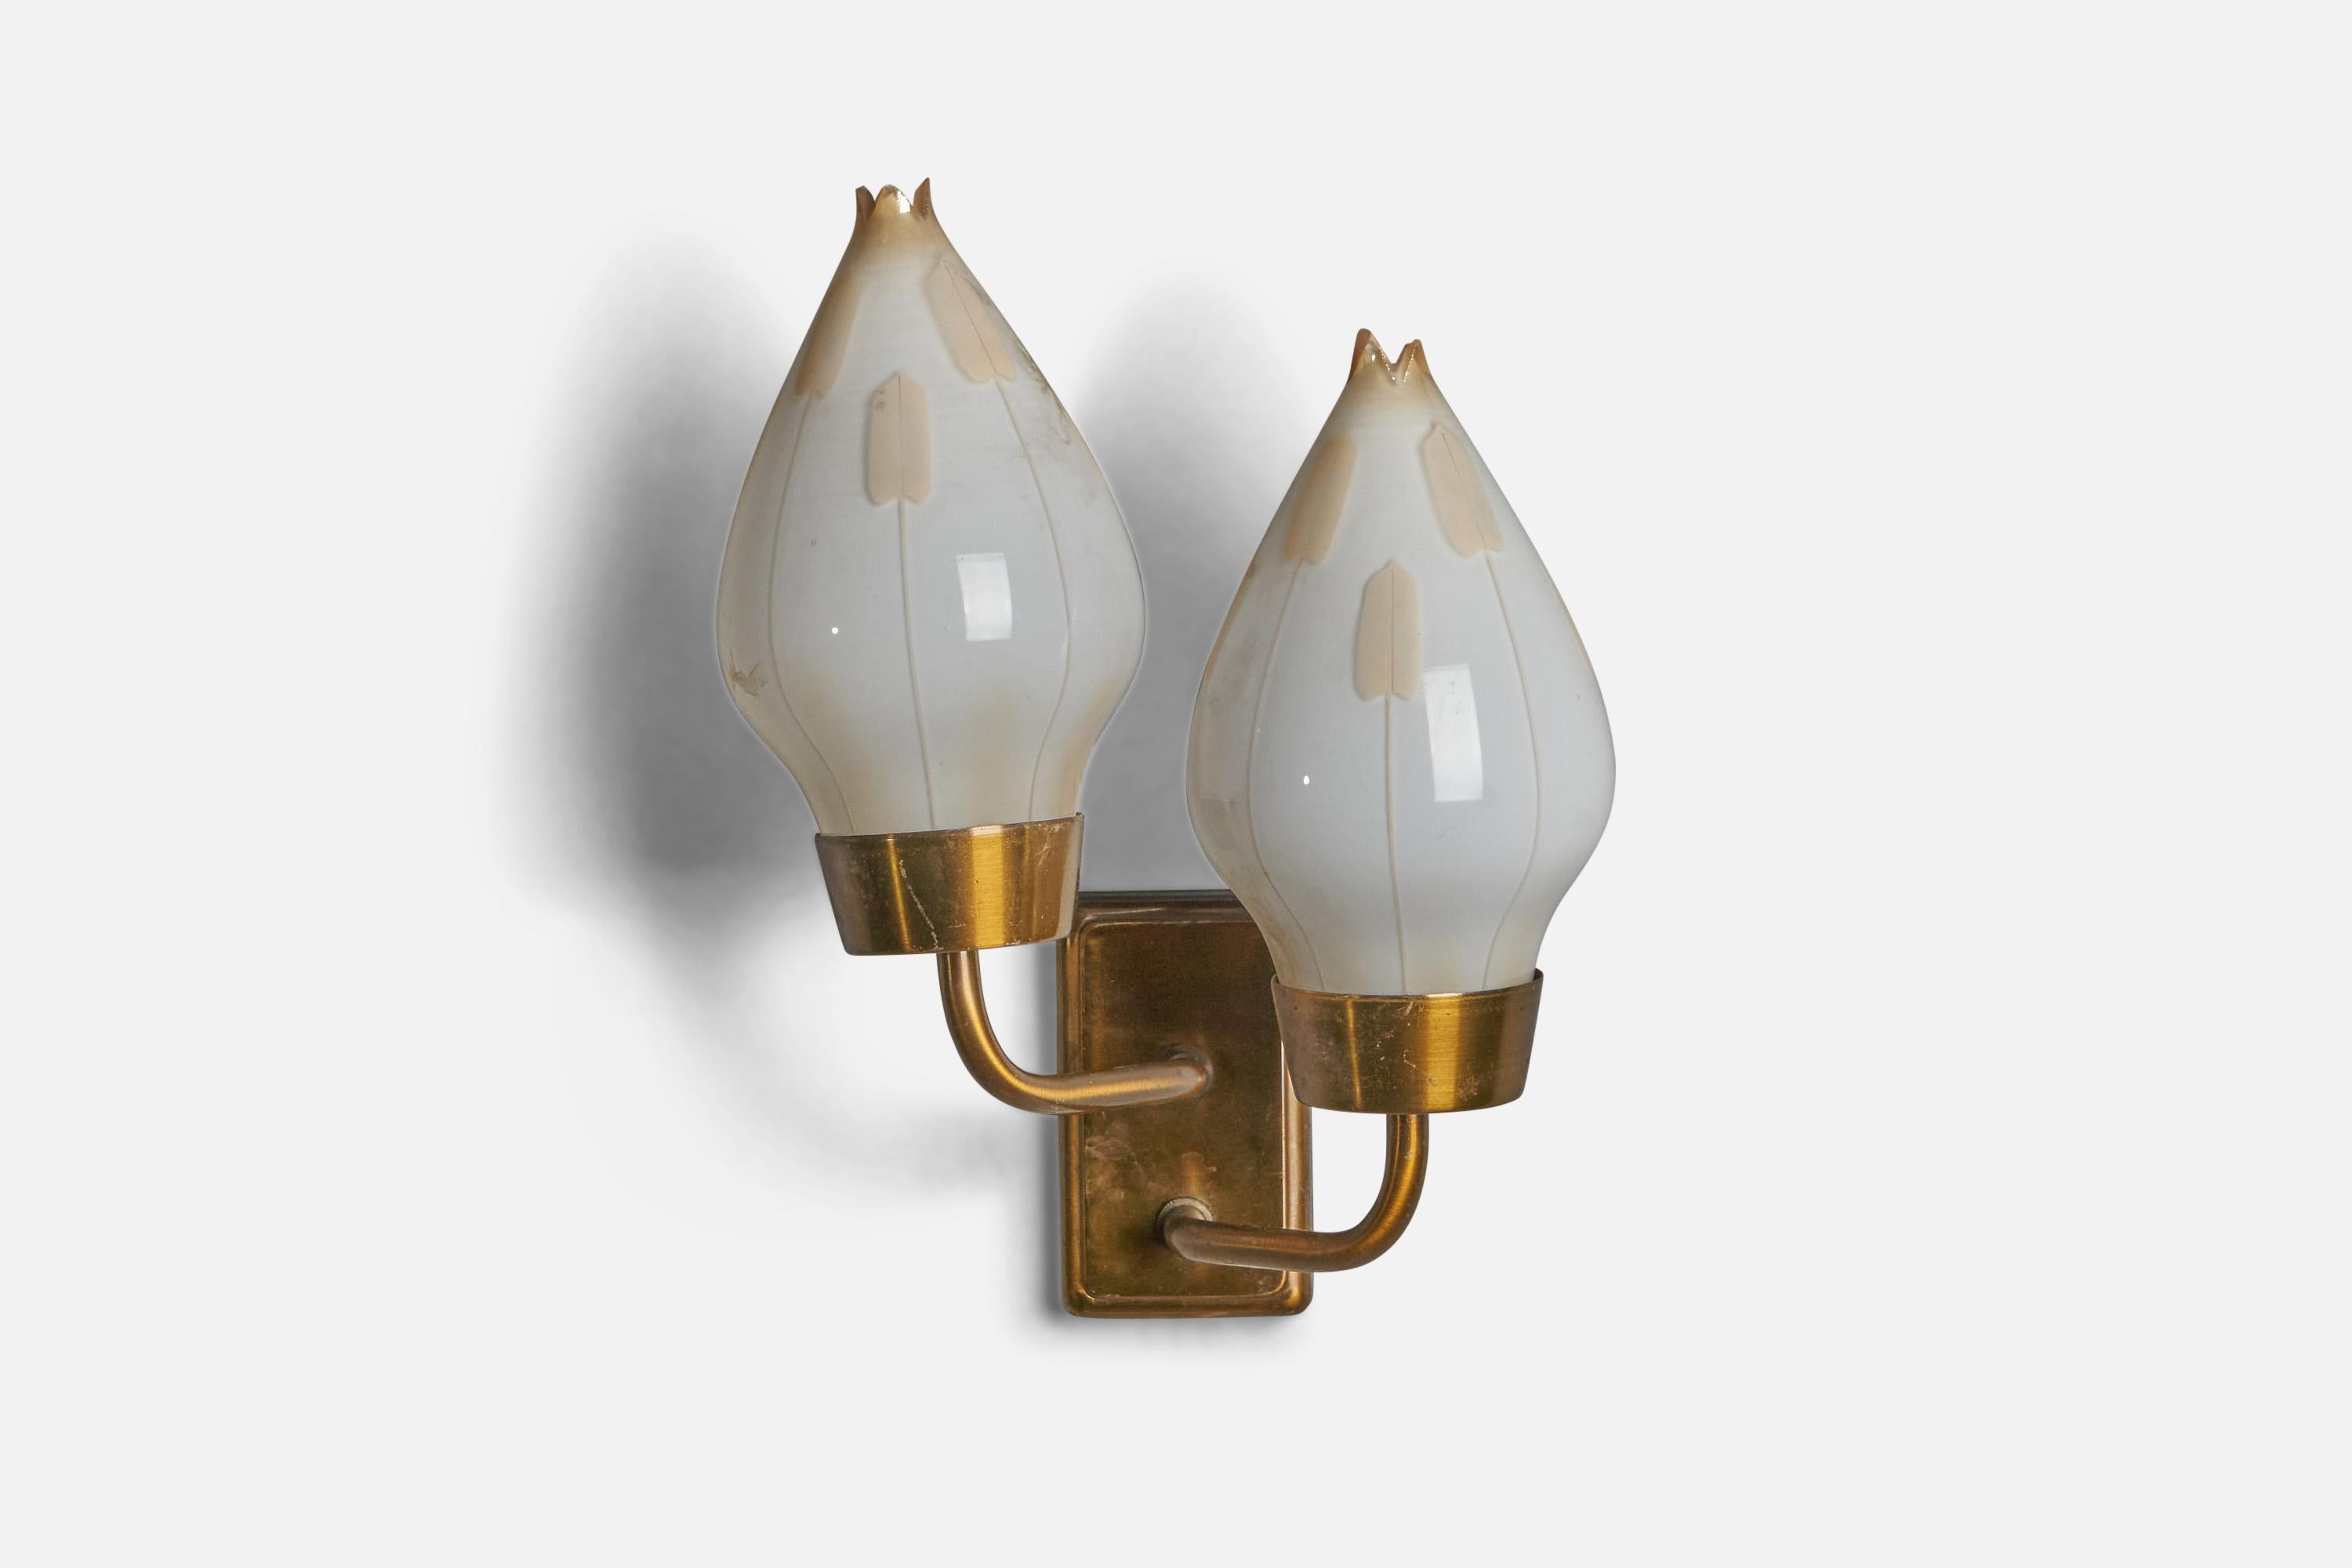 A brass and etched opaline glass wall light designed and produced in Sweden, c. 1940s.

Overall Dimensions (inches): 10.5” H x 8” W x 6” D
Back Plate Dimensions (inches): 3.9” H x 2.4” W x 0.75” D
Bulb Specifications: E-14 Bulb
Number of Sockets: 2